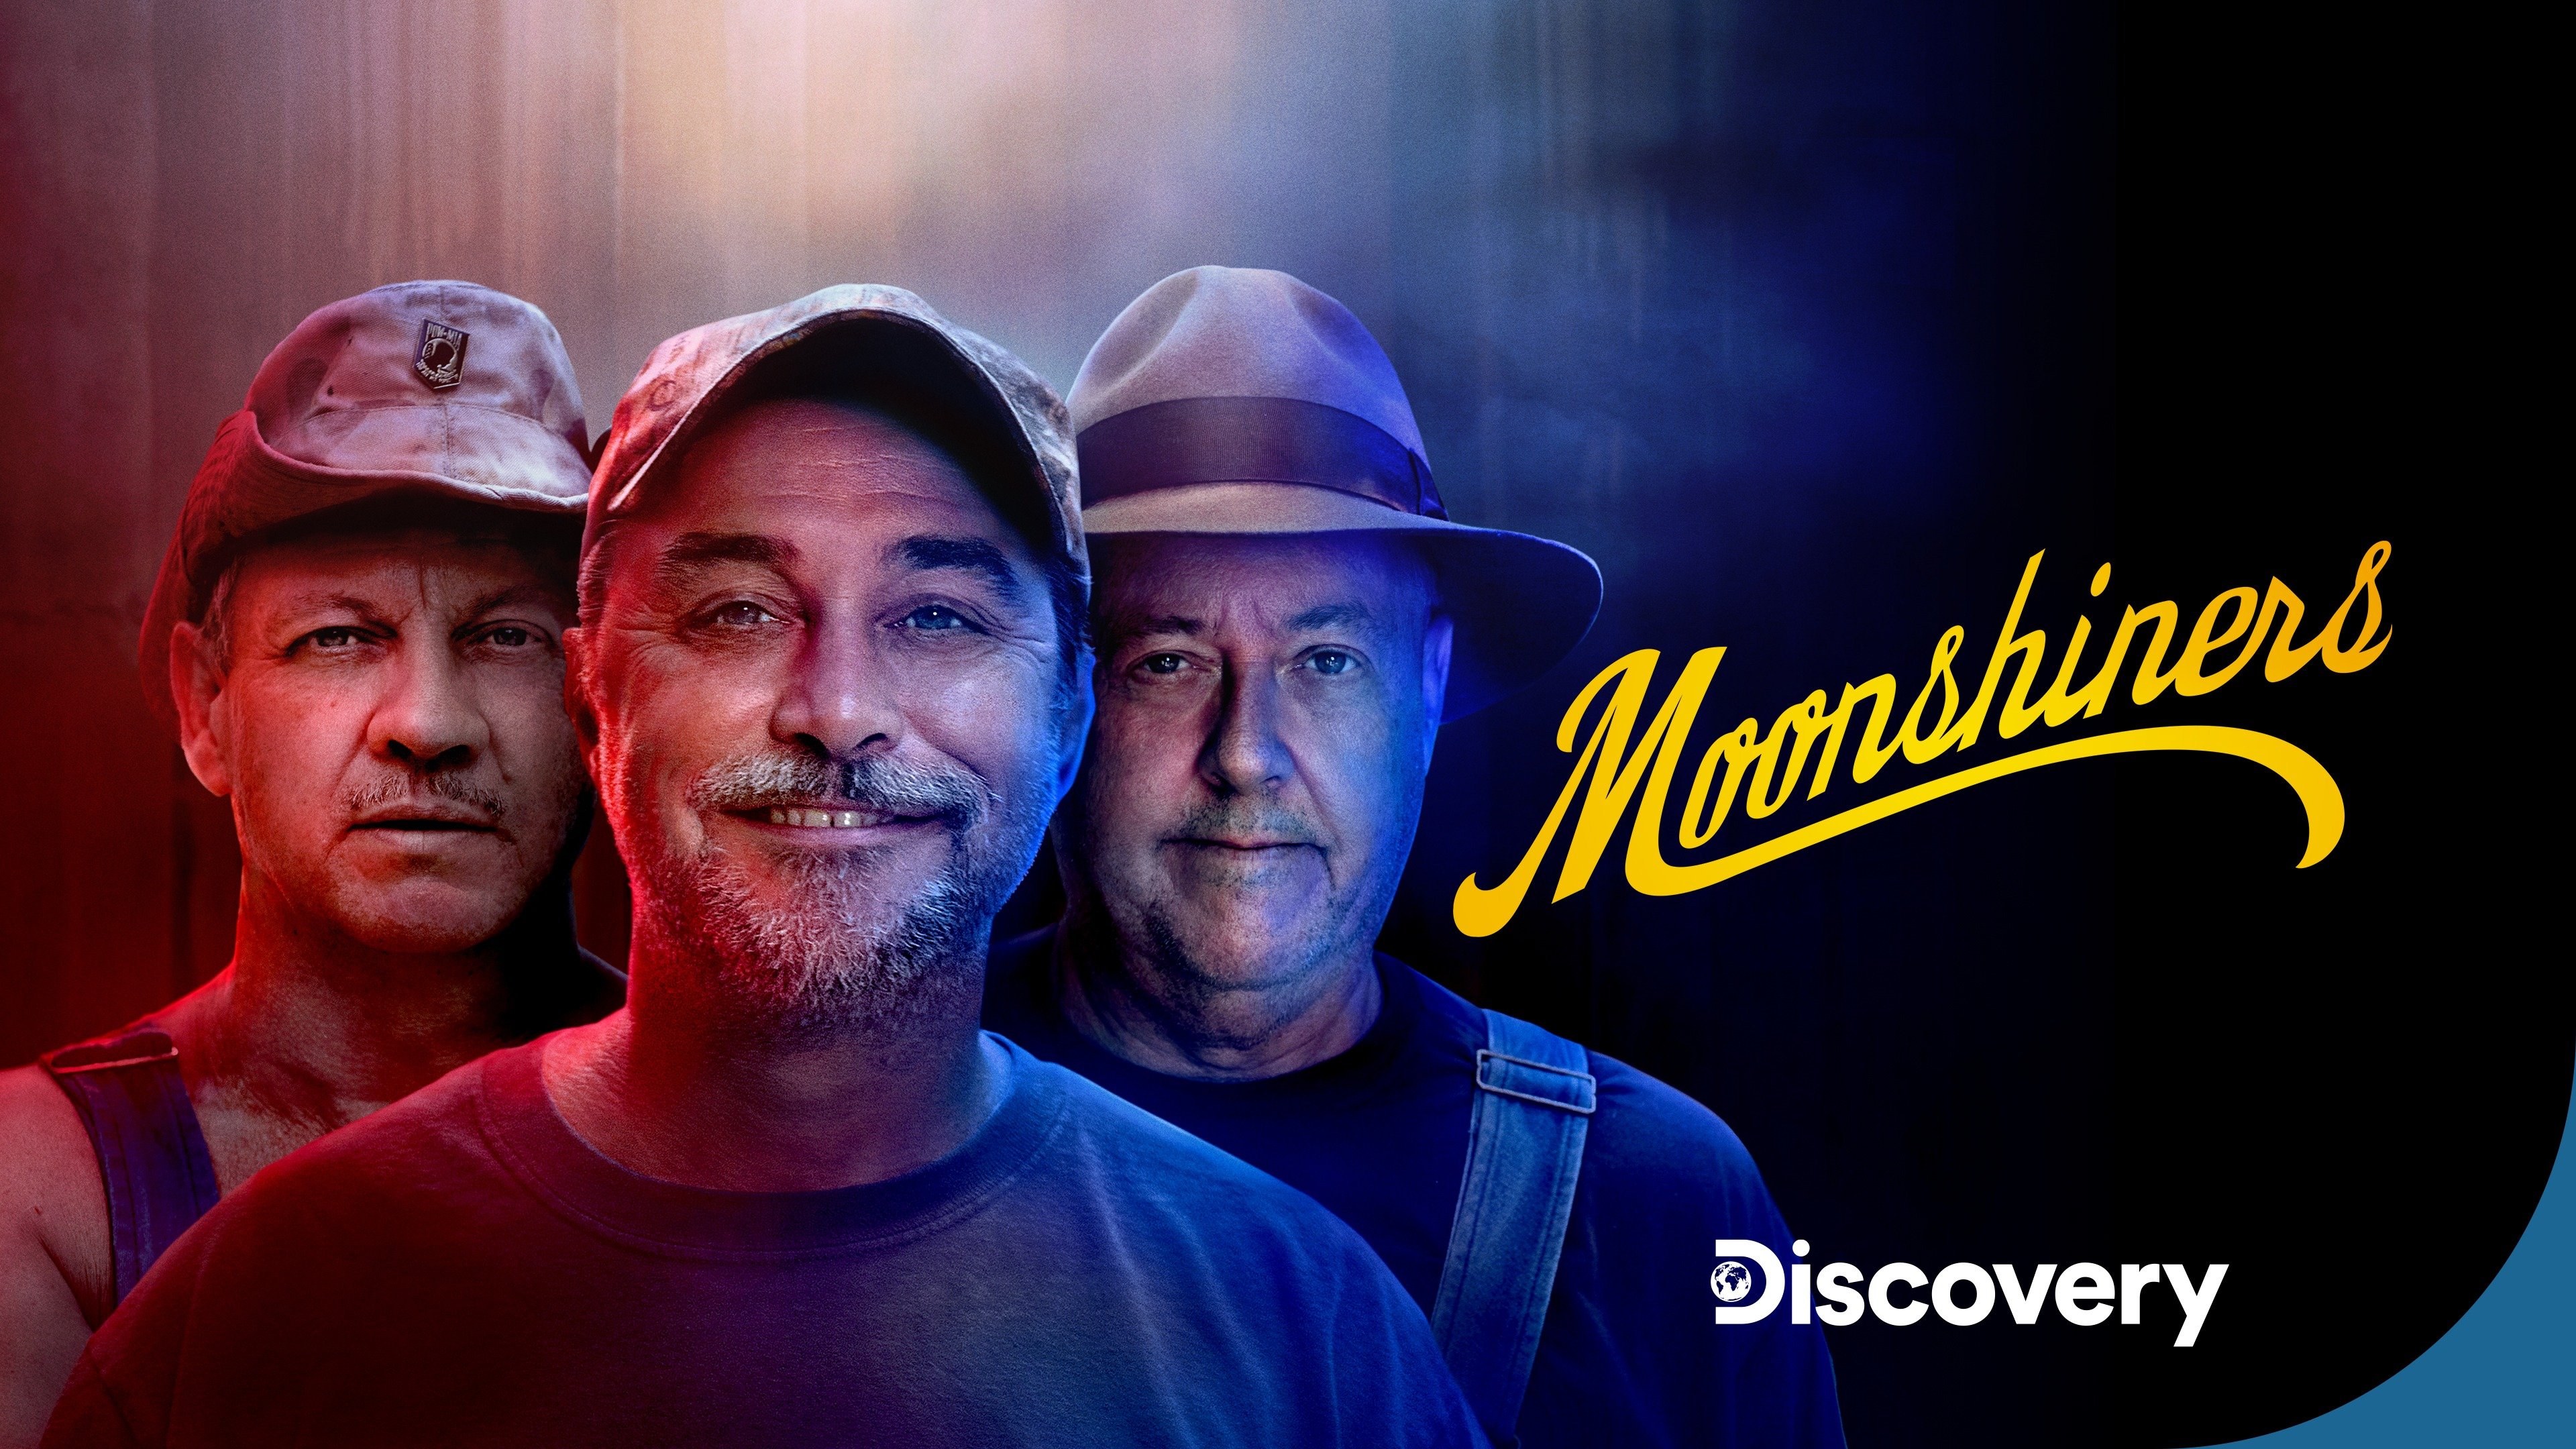 Moonshiners 2022 Schedule Moonshiners - Rotten Tomatoes